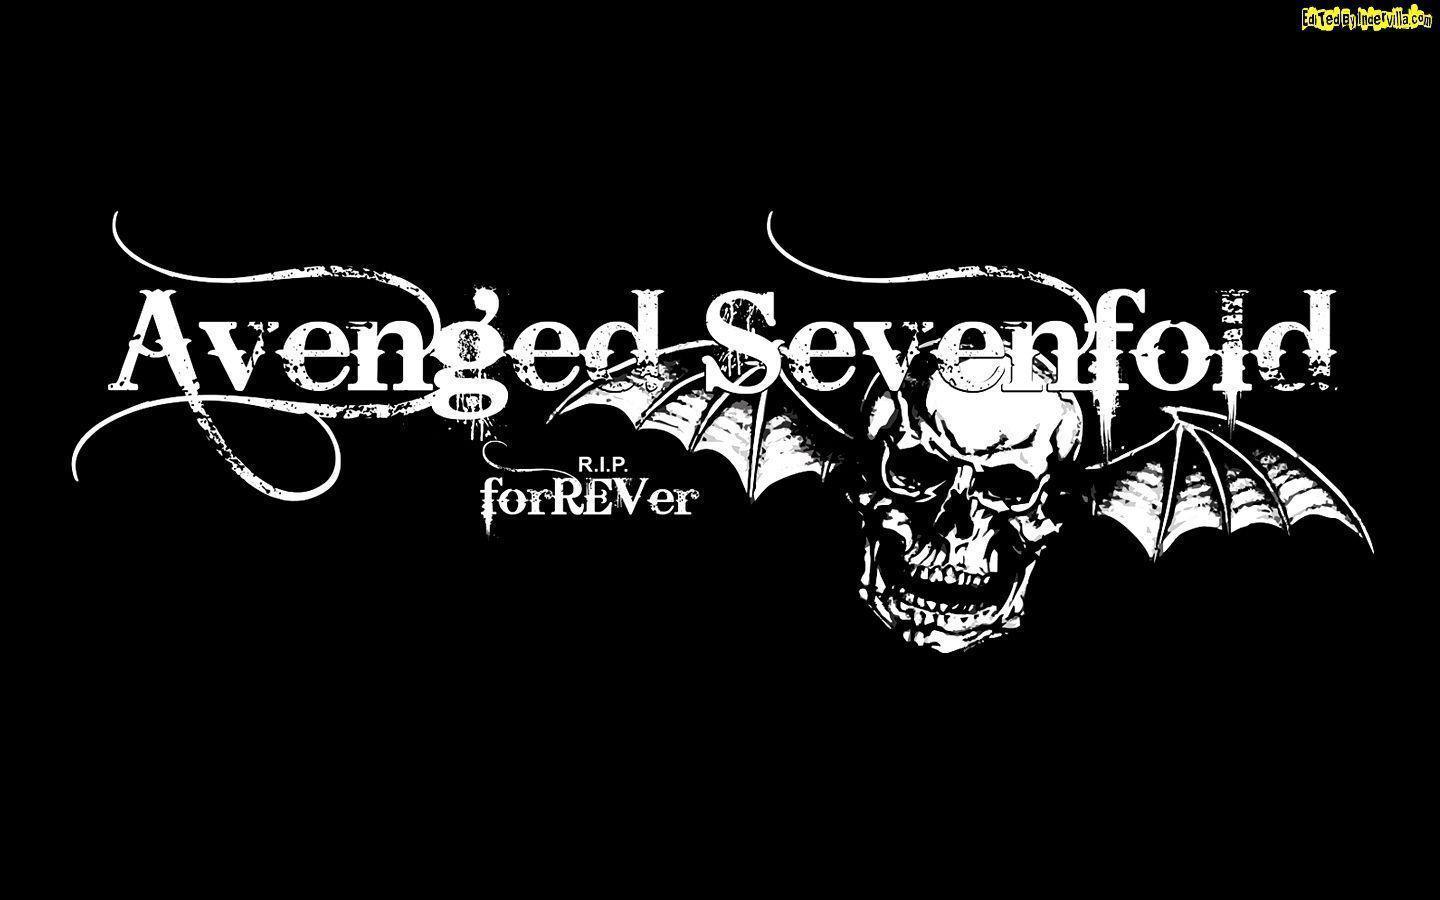 Avenged Sevenfold Fanatic HD Picture Wallpaper 1440x900PX